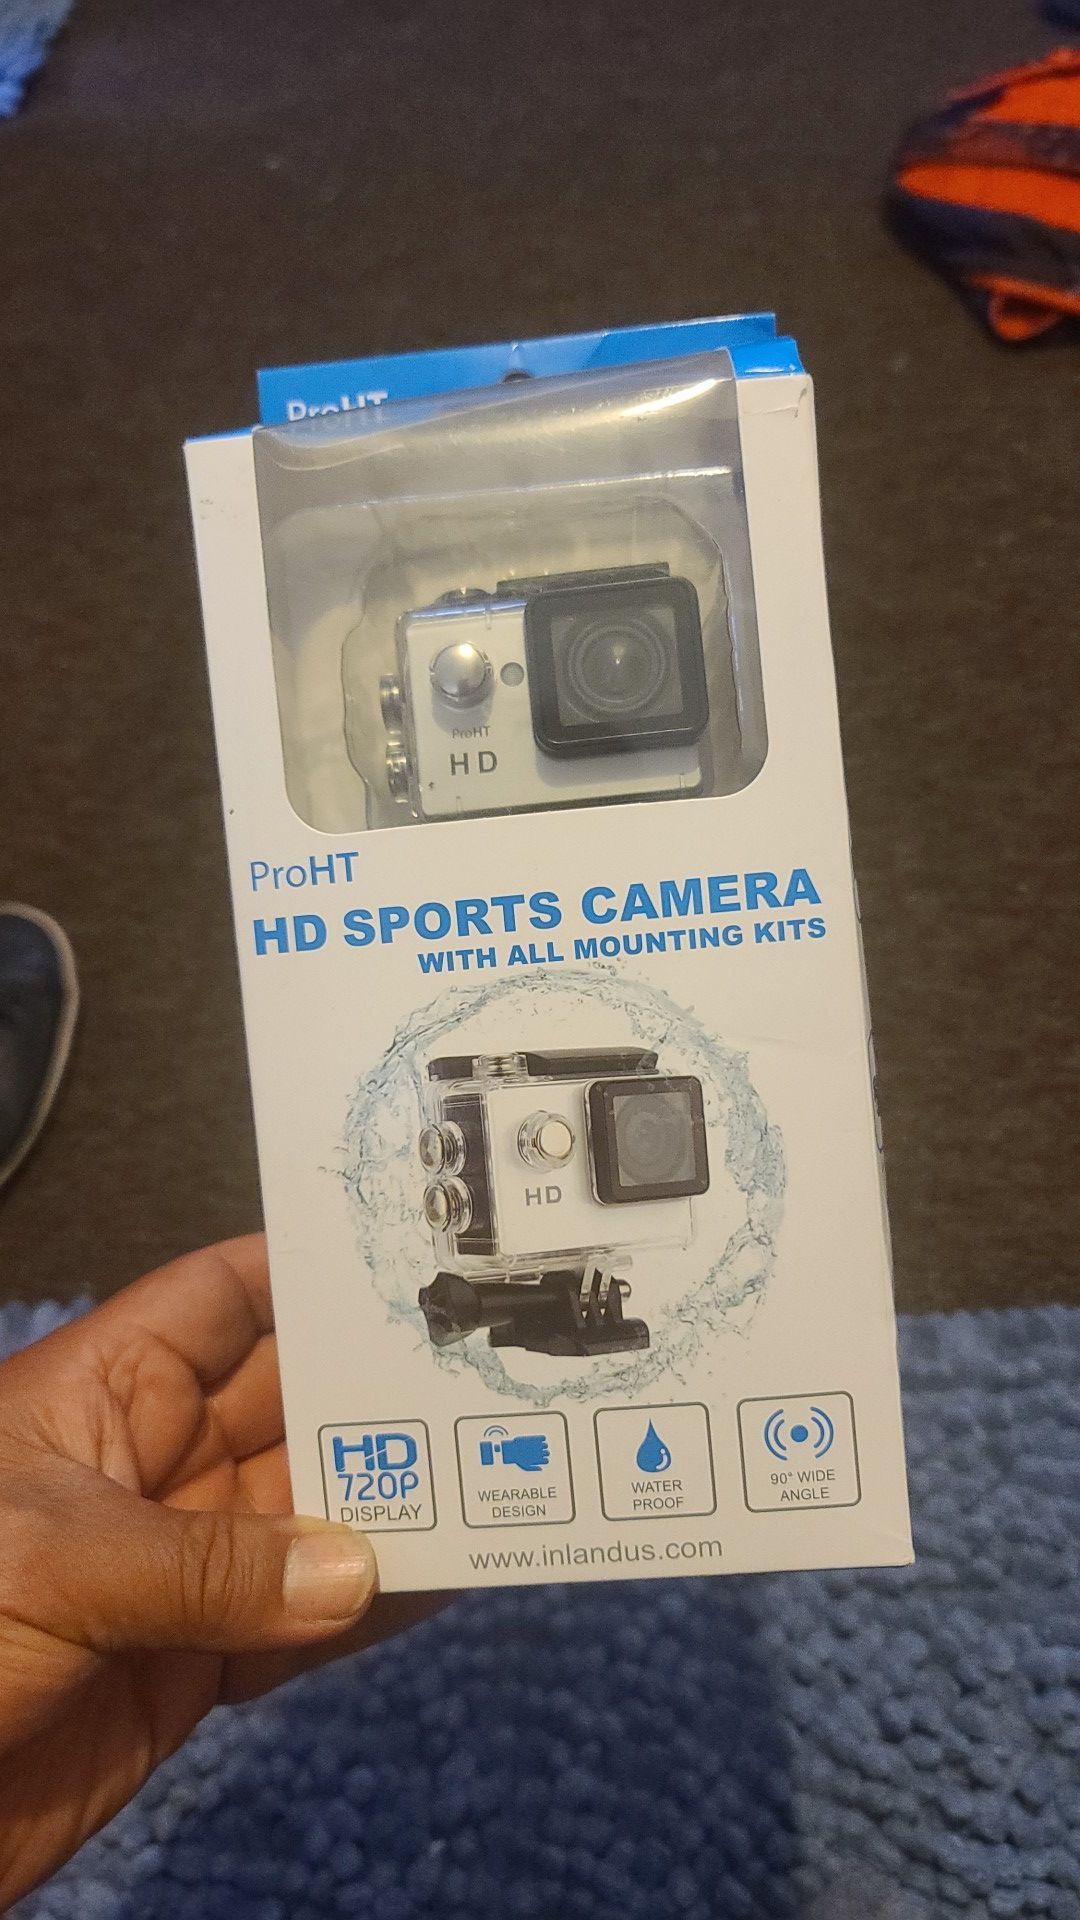 HD SPORTS CAMERA with all mounting kits